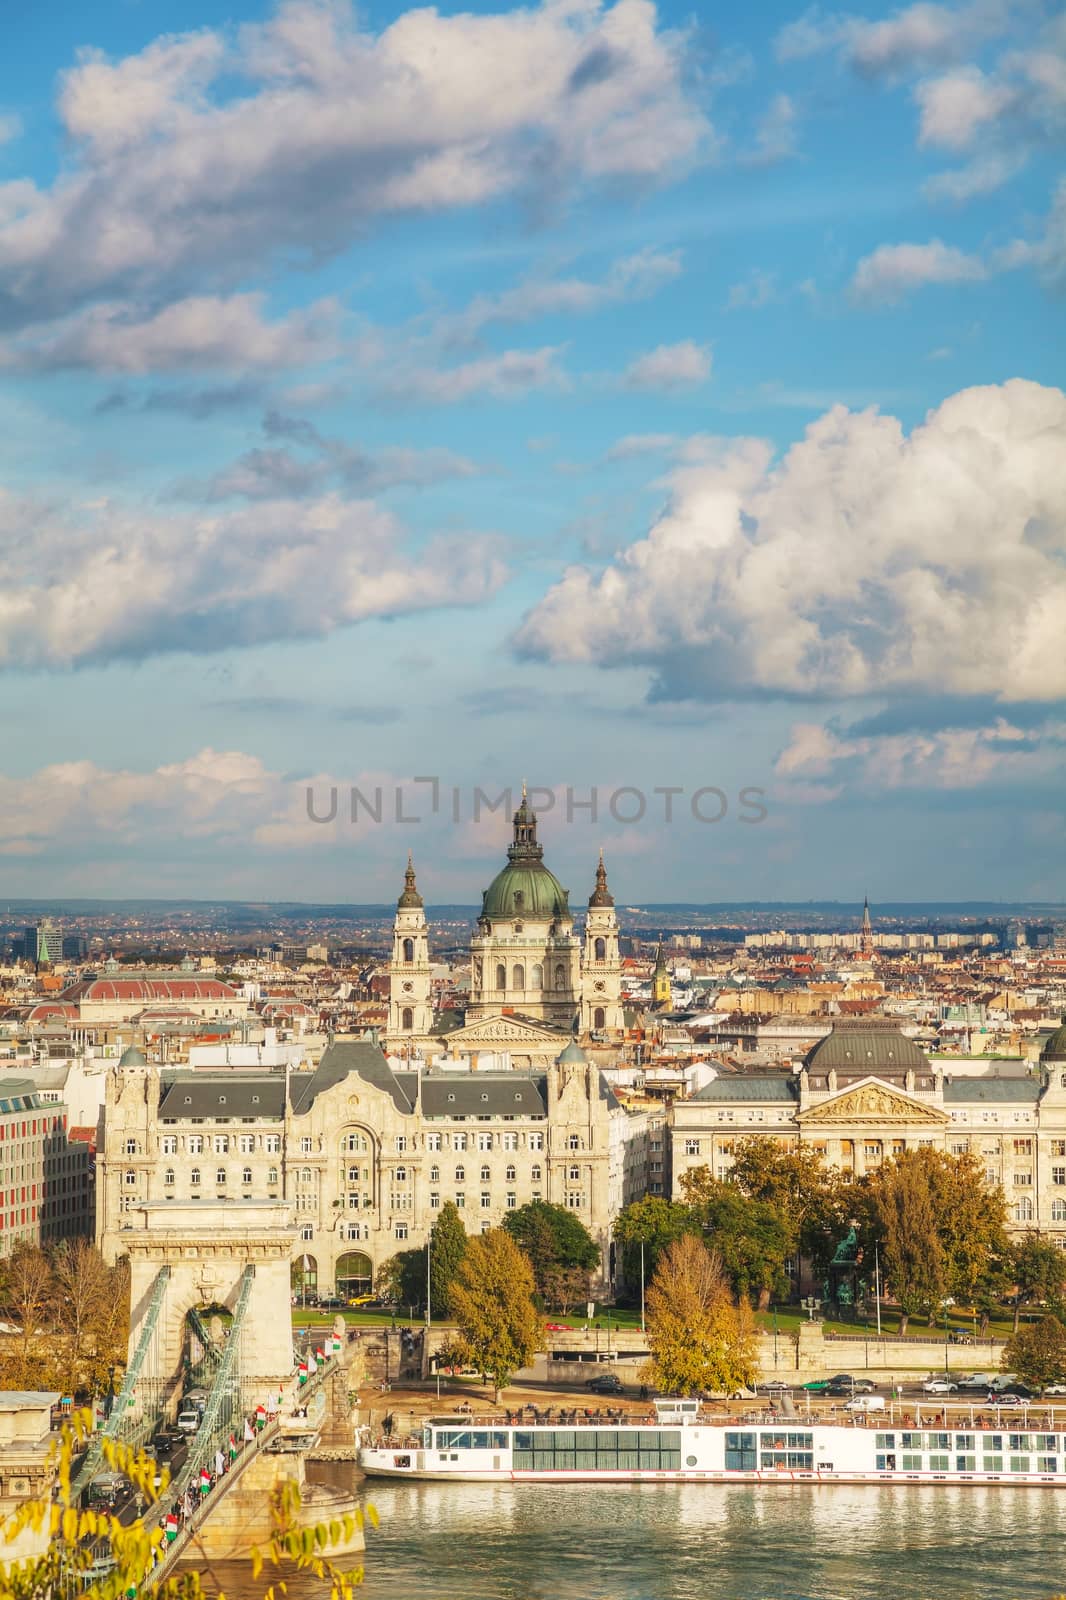 Overview of Budapest, Hungary on a cloudy day